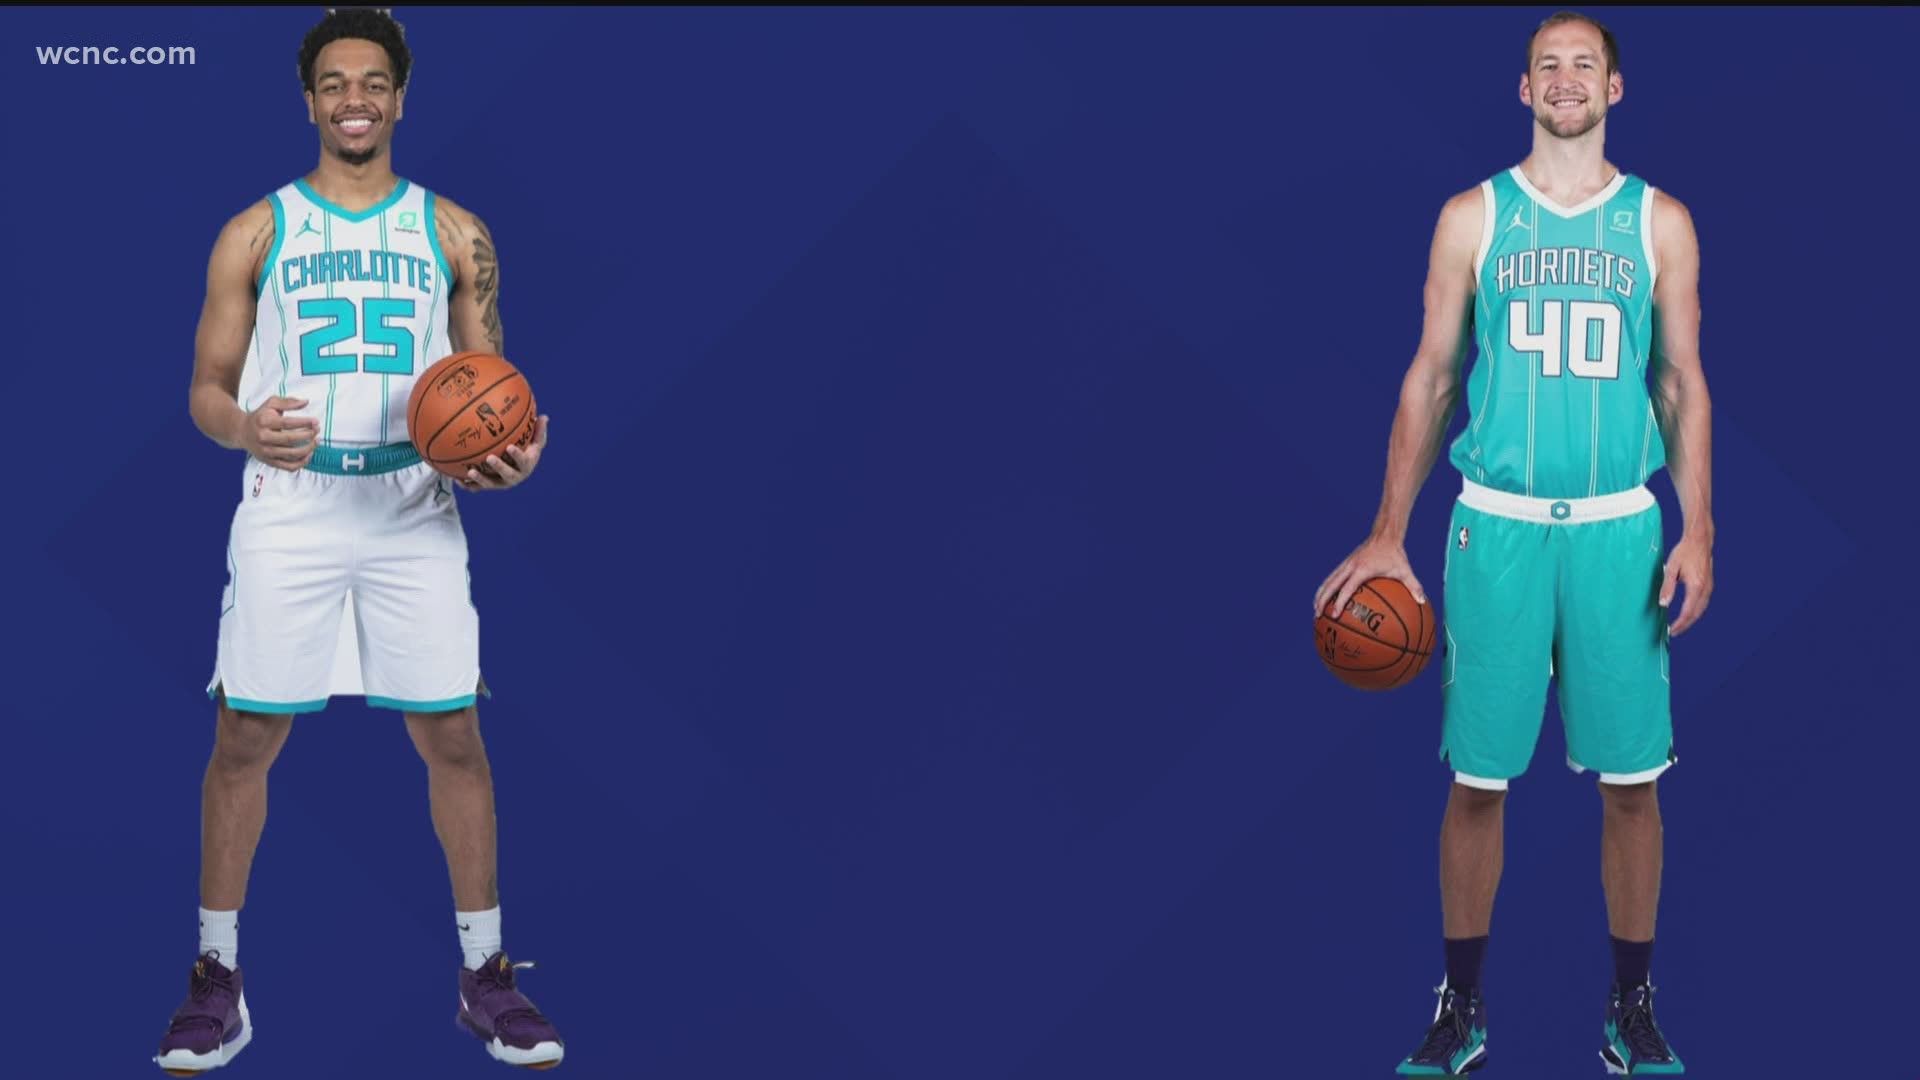 The Charlotte Hornets will take the court for the 2020-21 season in new uniforms for the first time since rebranding as the Hornets in 2014.